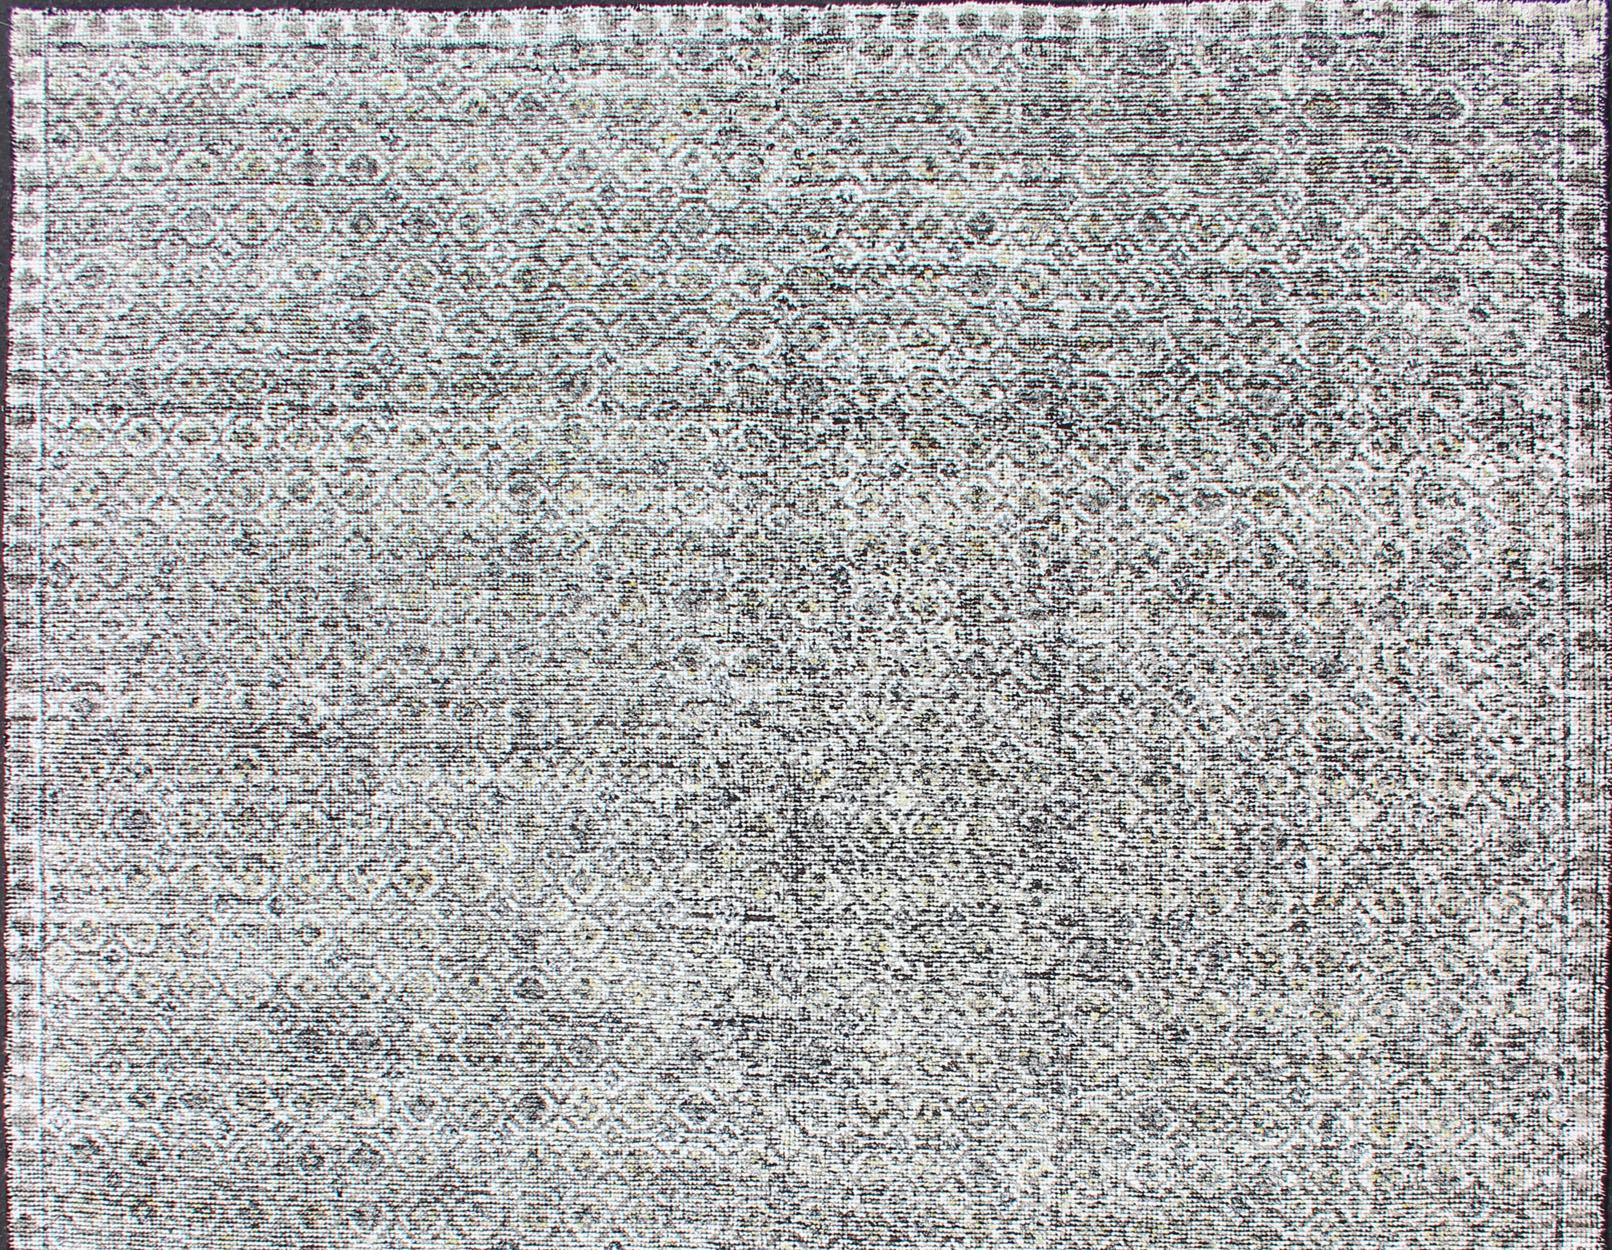 Shades of cream, light yellow, and charcoal modern Indian piled rug, rug KHN-1022-TR-818, country of origin / type: India / Indian modern piled rug.

A unique blend of historical and modern design, this dynamic and exciting composition is